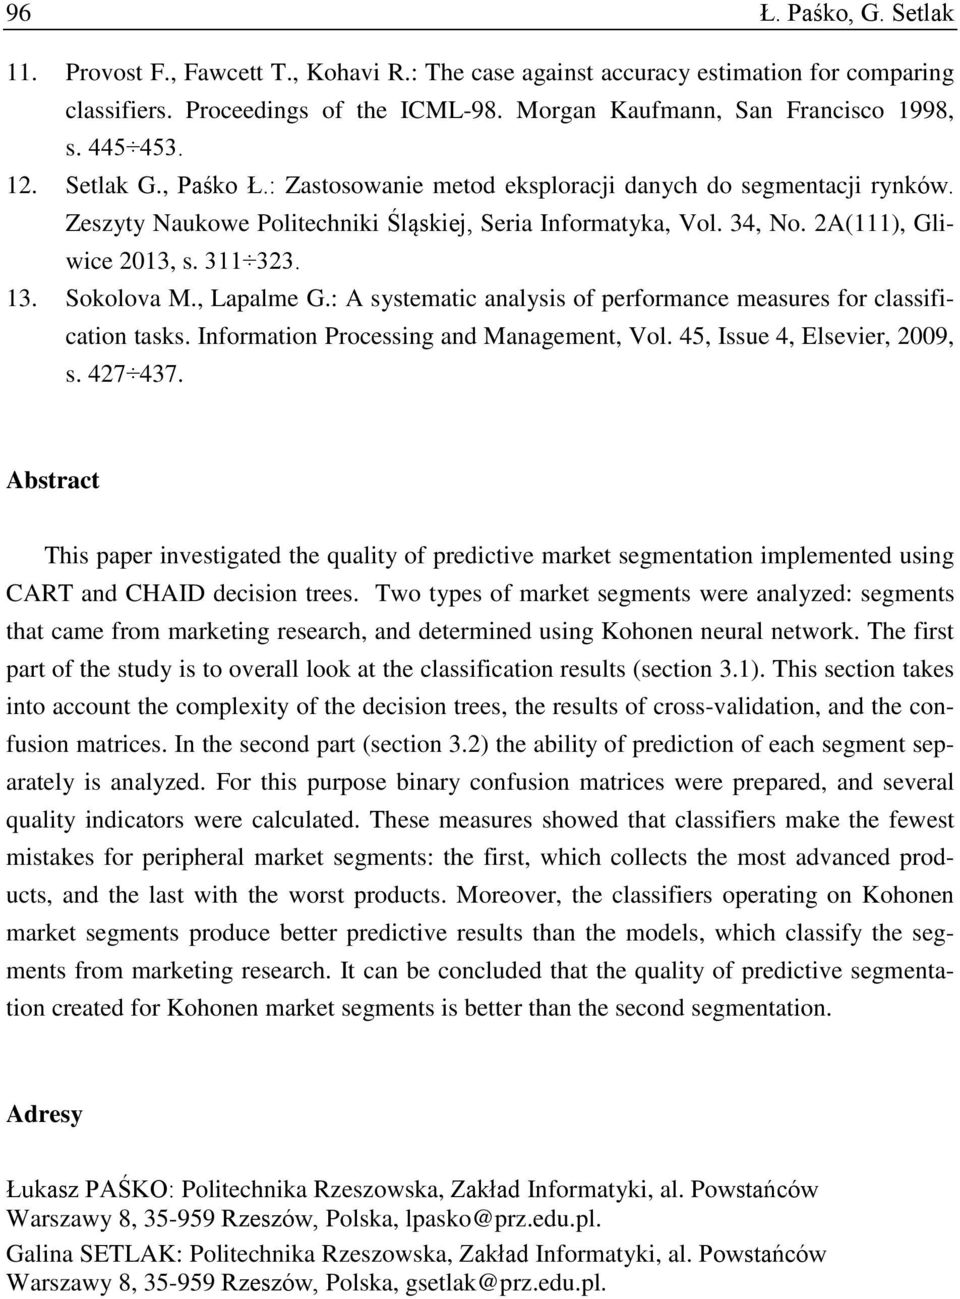 13. Sokolova M., Lapalme G.: A systematic analysis of performance measures for classification tasks. Information Processing and Management, Vol. 45, Issue 4, Elsevier, 2009, s. 427 437.